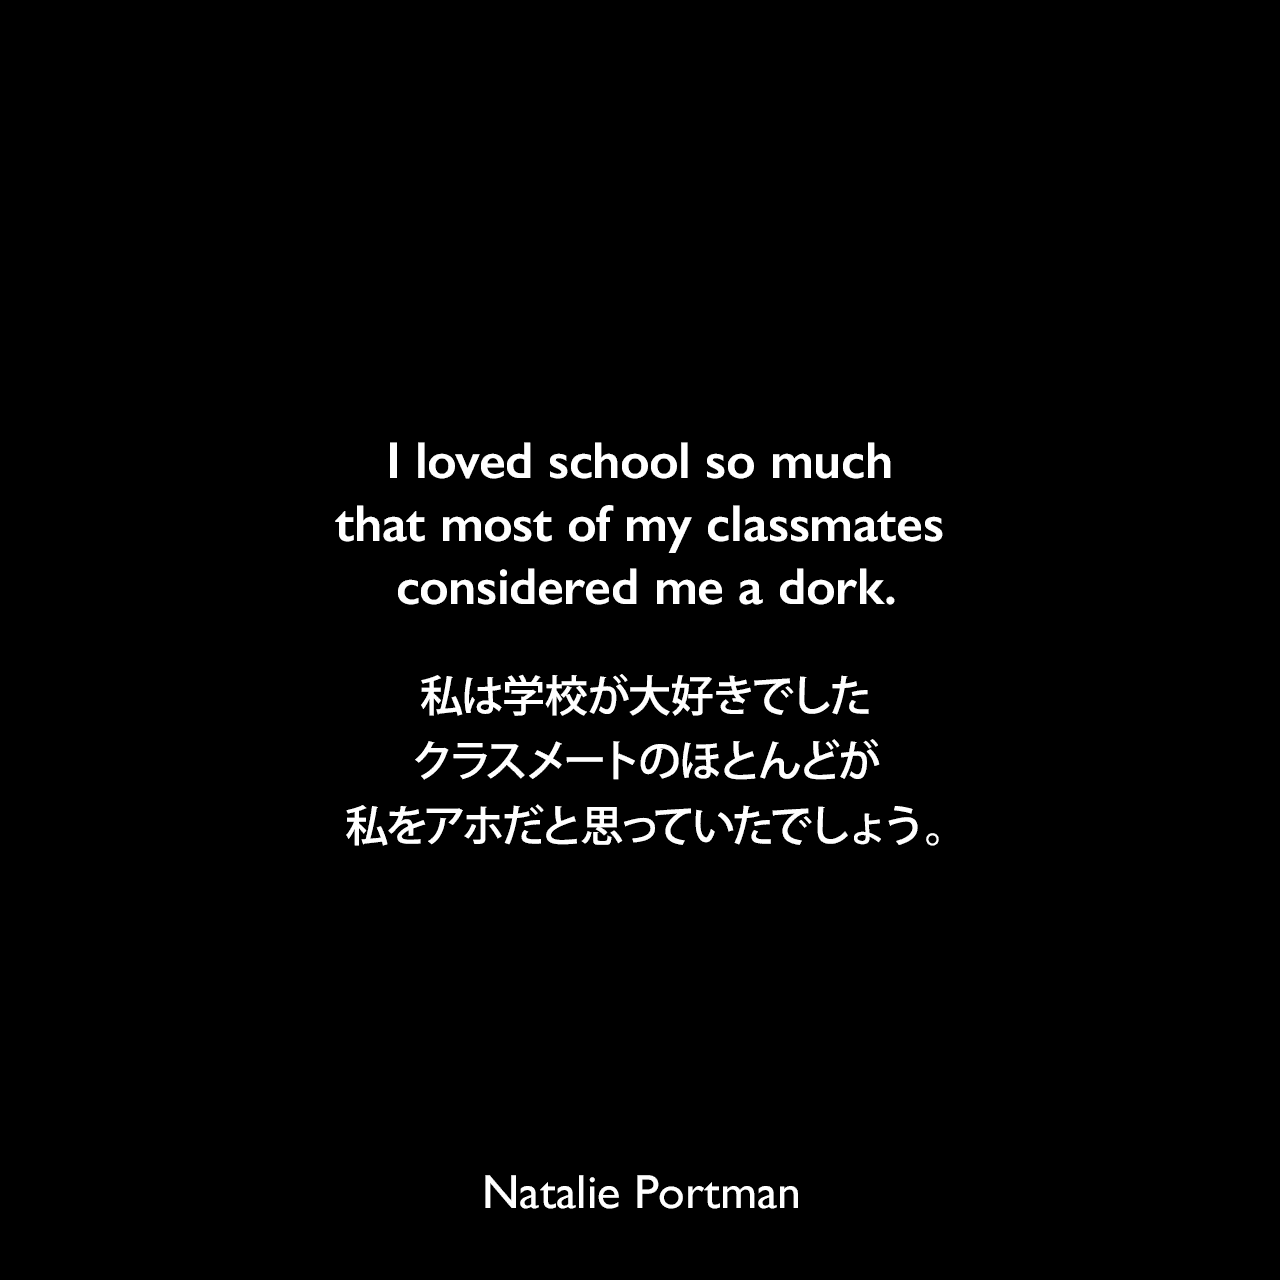 I loved school so much that most of my classmates considered me a dork.私は学校が大好きでした、クラスメートのほとんどが私をアホだと思っていたでしょう。Natalie Portman